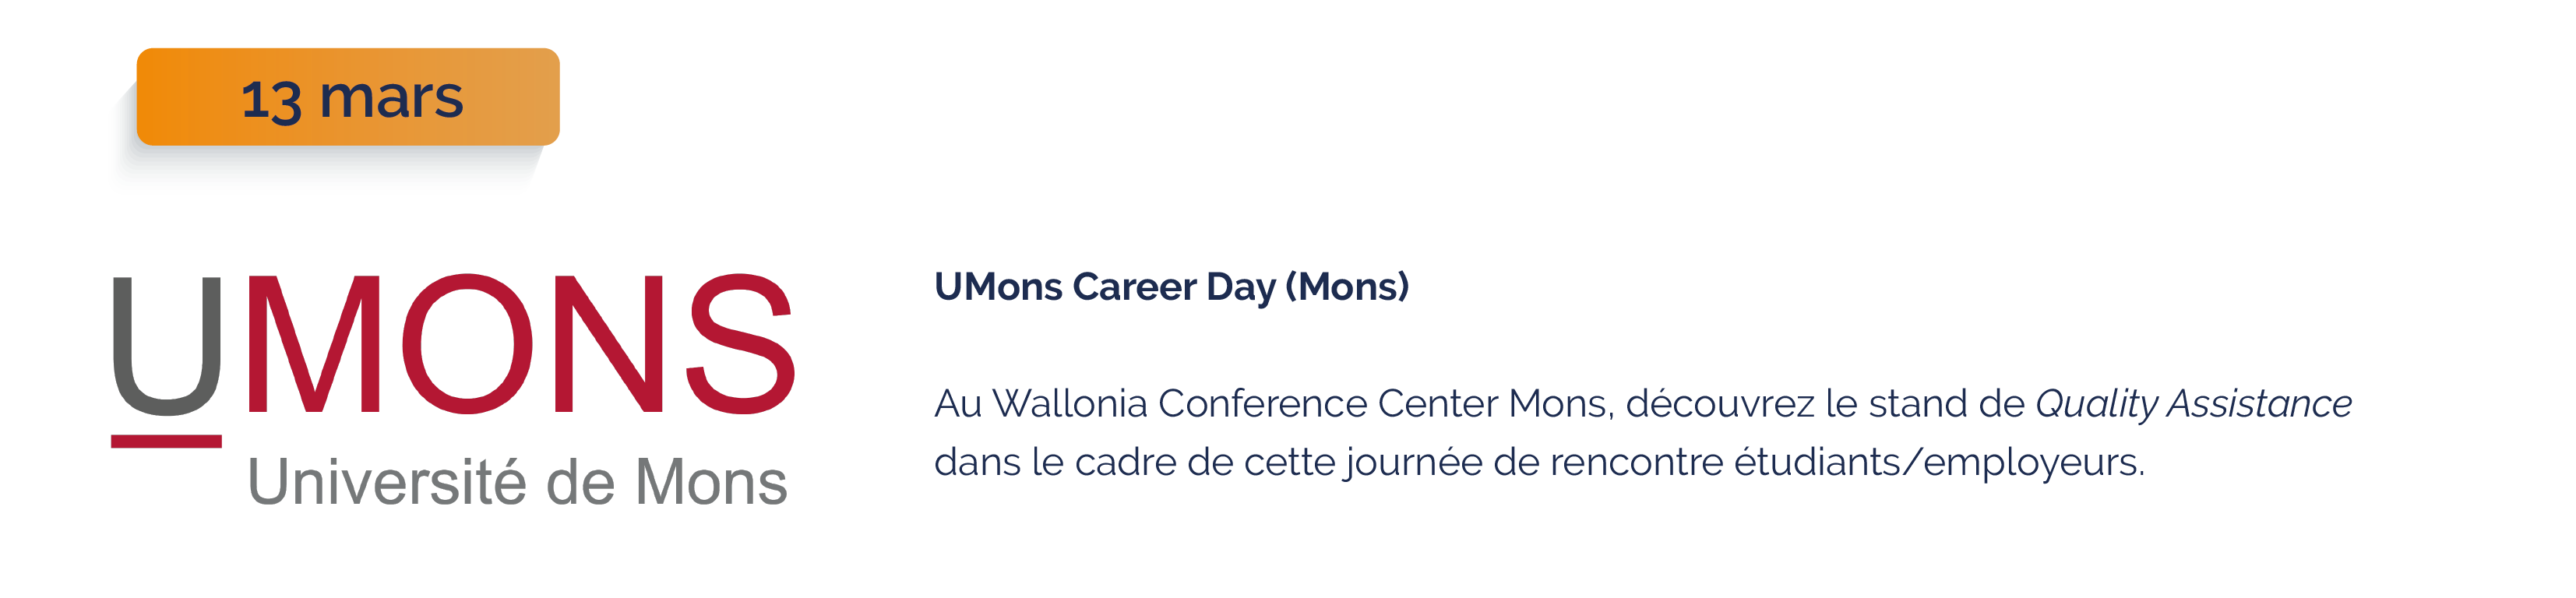 Quality Assistance_UMons Career Day 20240313